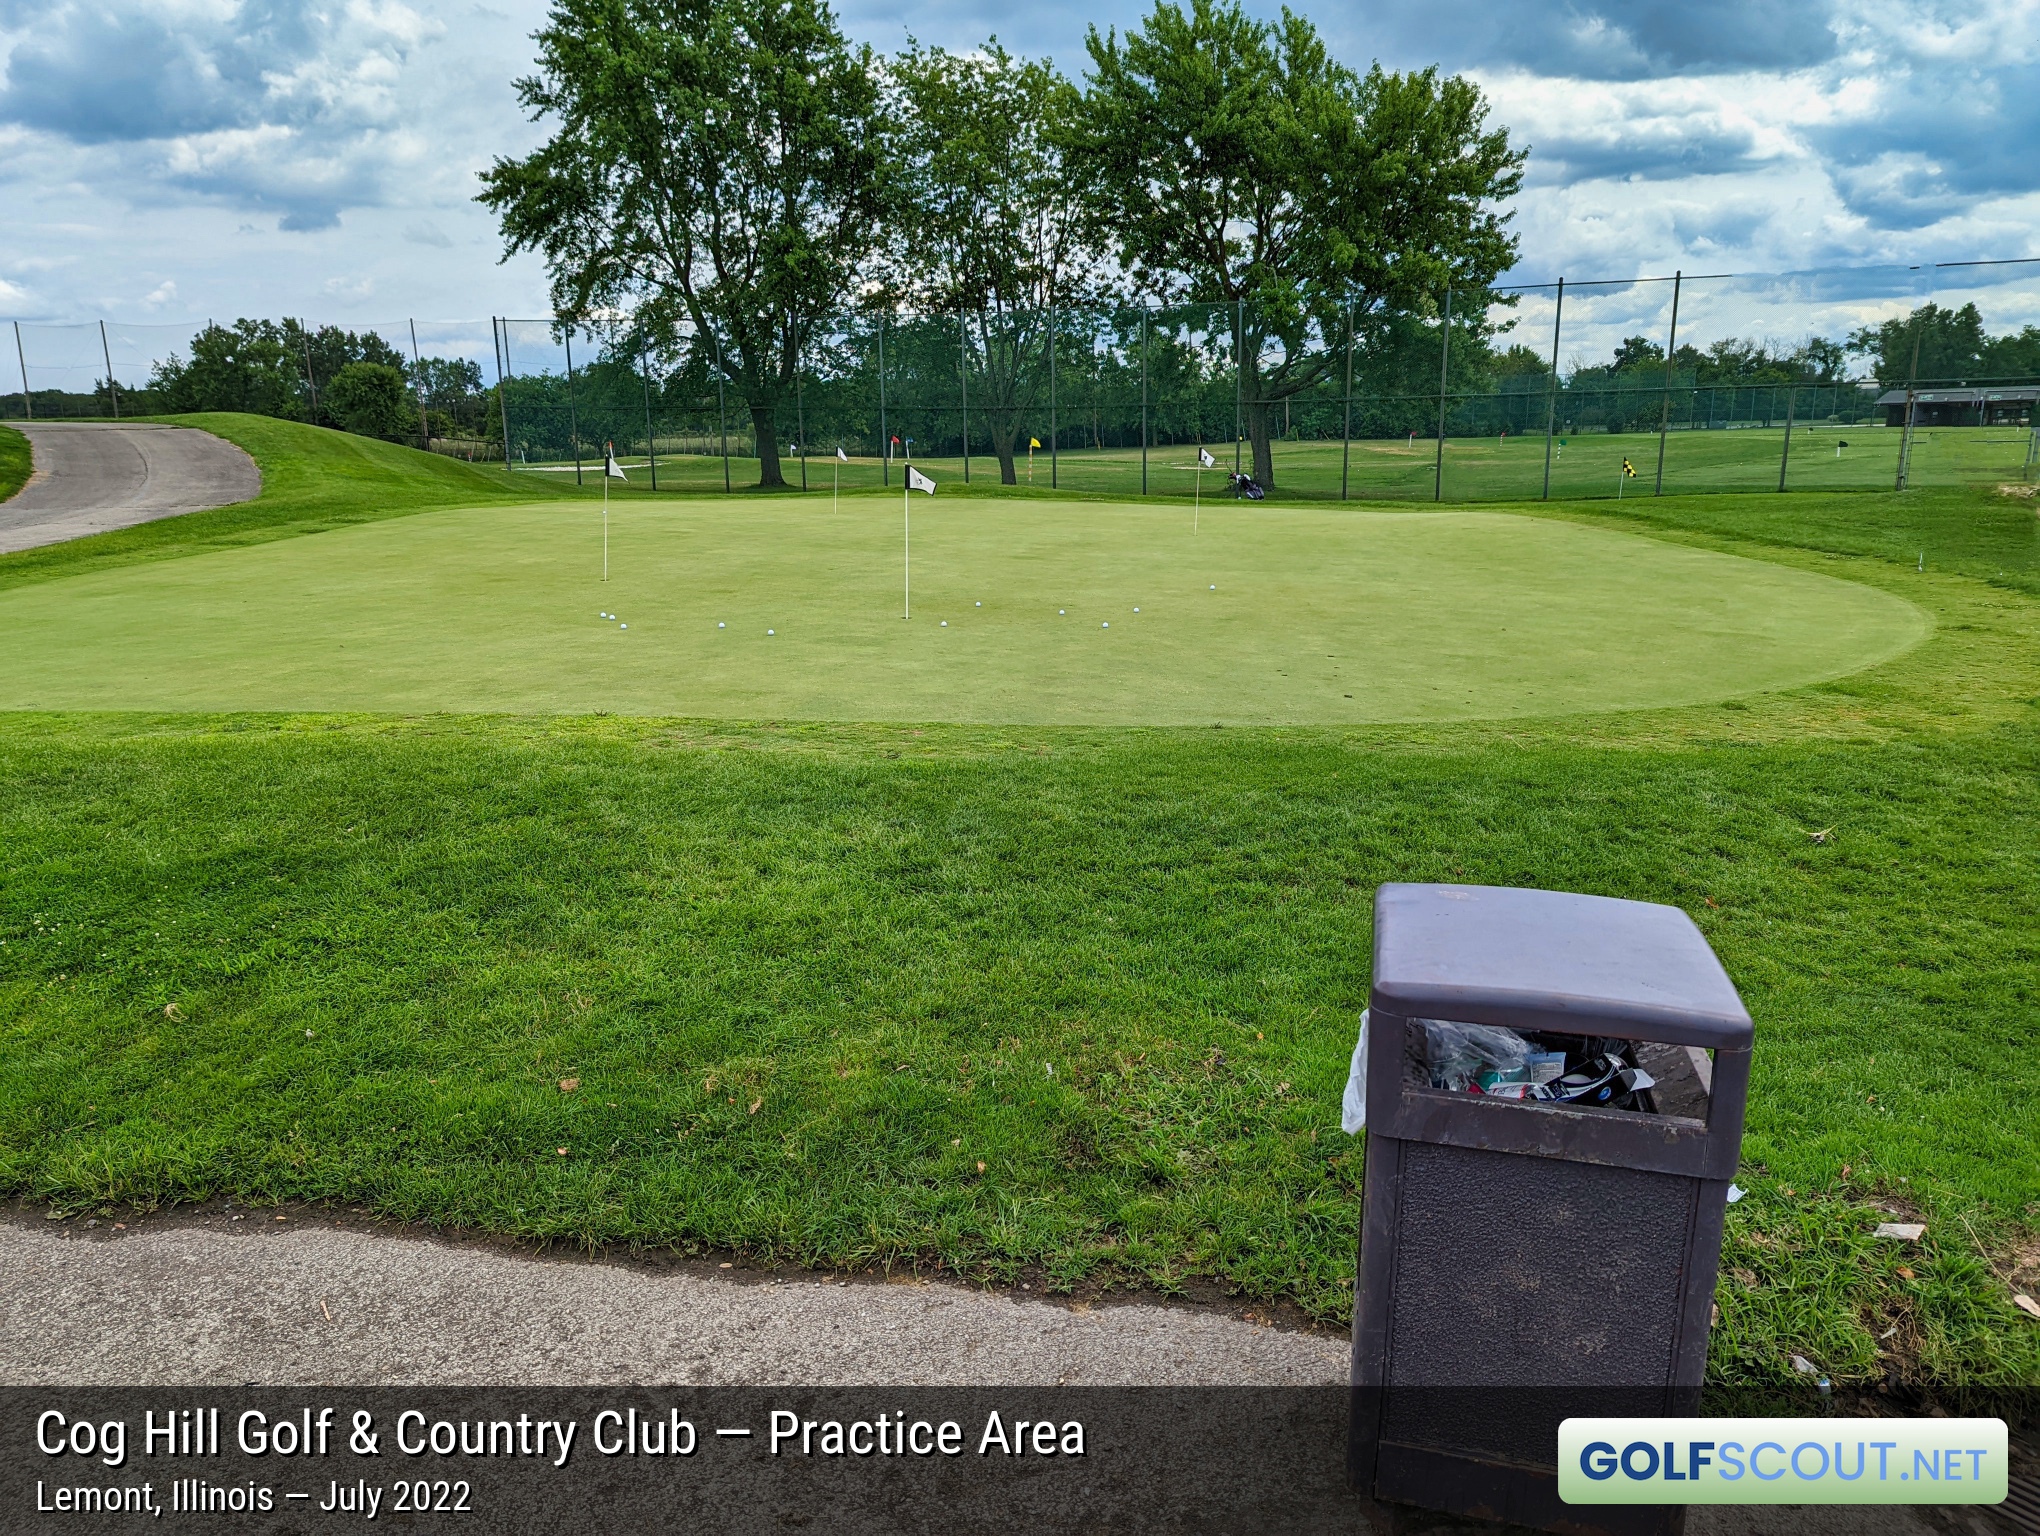 Photo of the practice area at Cog Hill Course #2 - Ravines in Lemont, Illinois. Another practice green, to the left of the range, when facing it from the parking lot.